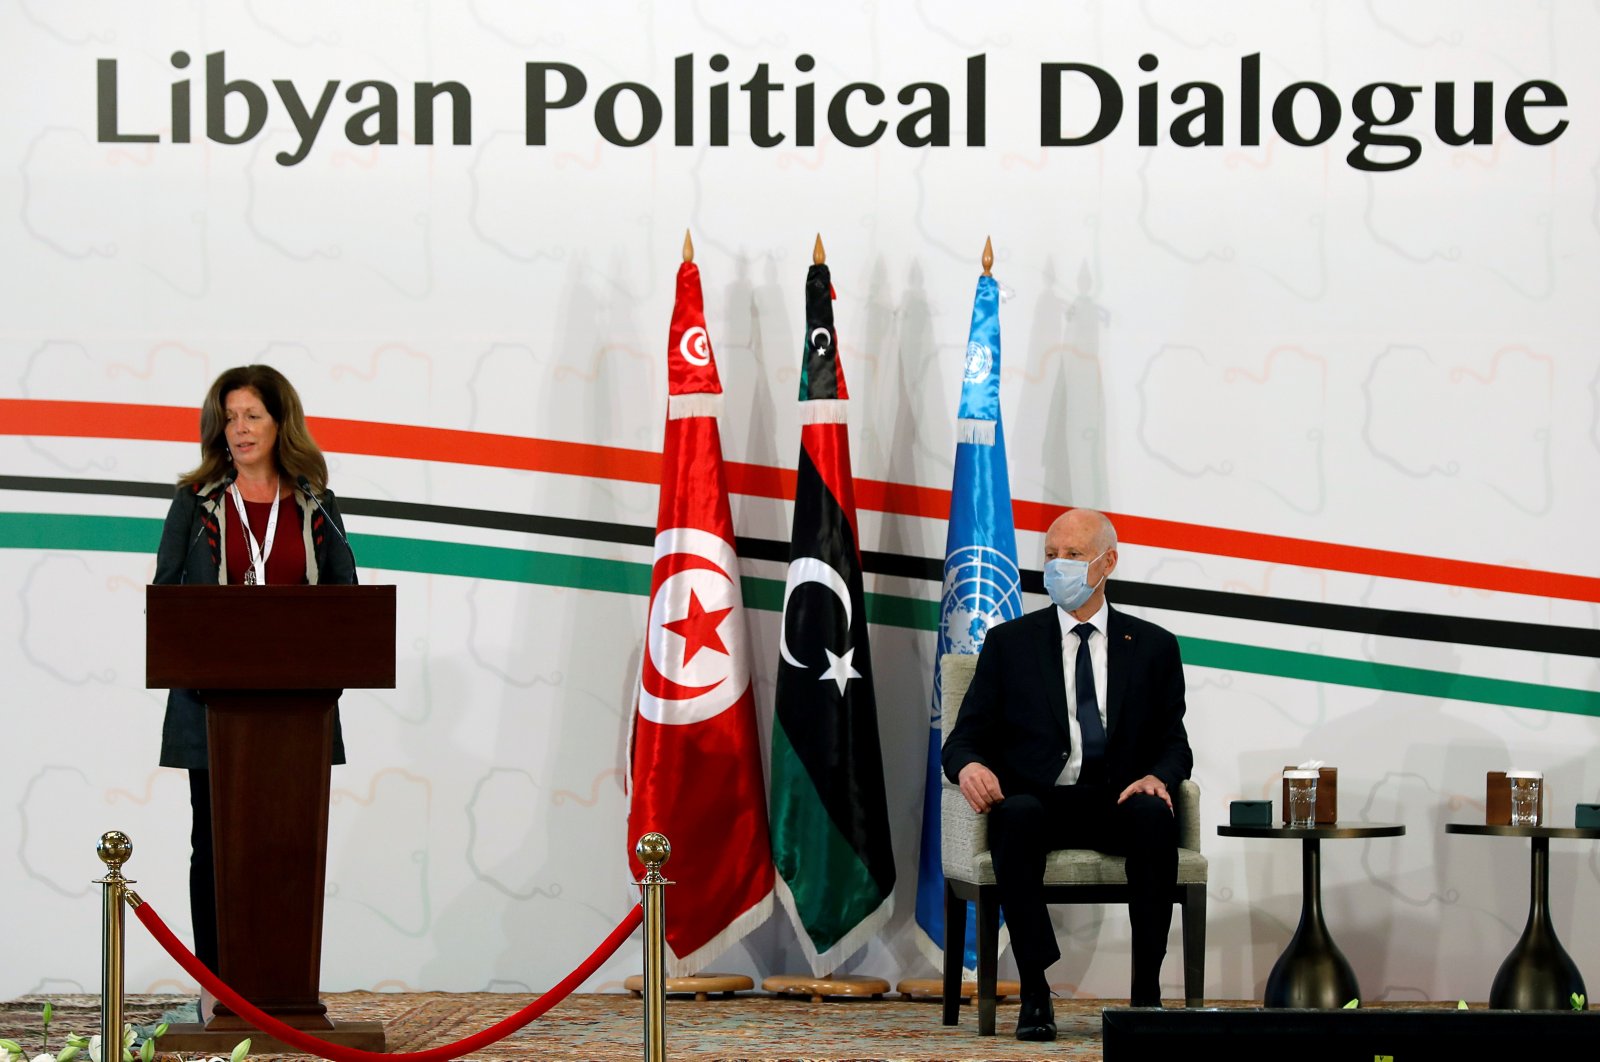 Deputy Special Representative of the UN Secretary-General for Political Affairs in Libya, Stephanie Williams, speaks as Tunisia's President Kais Saied listens to her during the Libyan Political Dialogue Forum in Tunis, Tunisia on Nov. 9, 2020. (Reuters Photo)